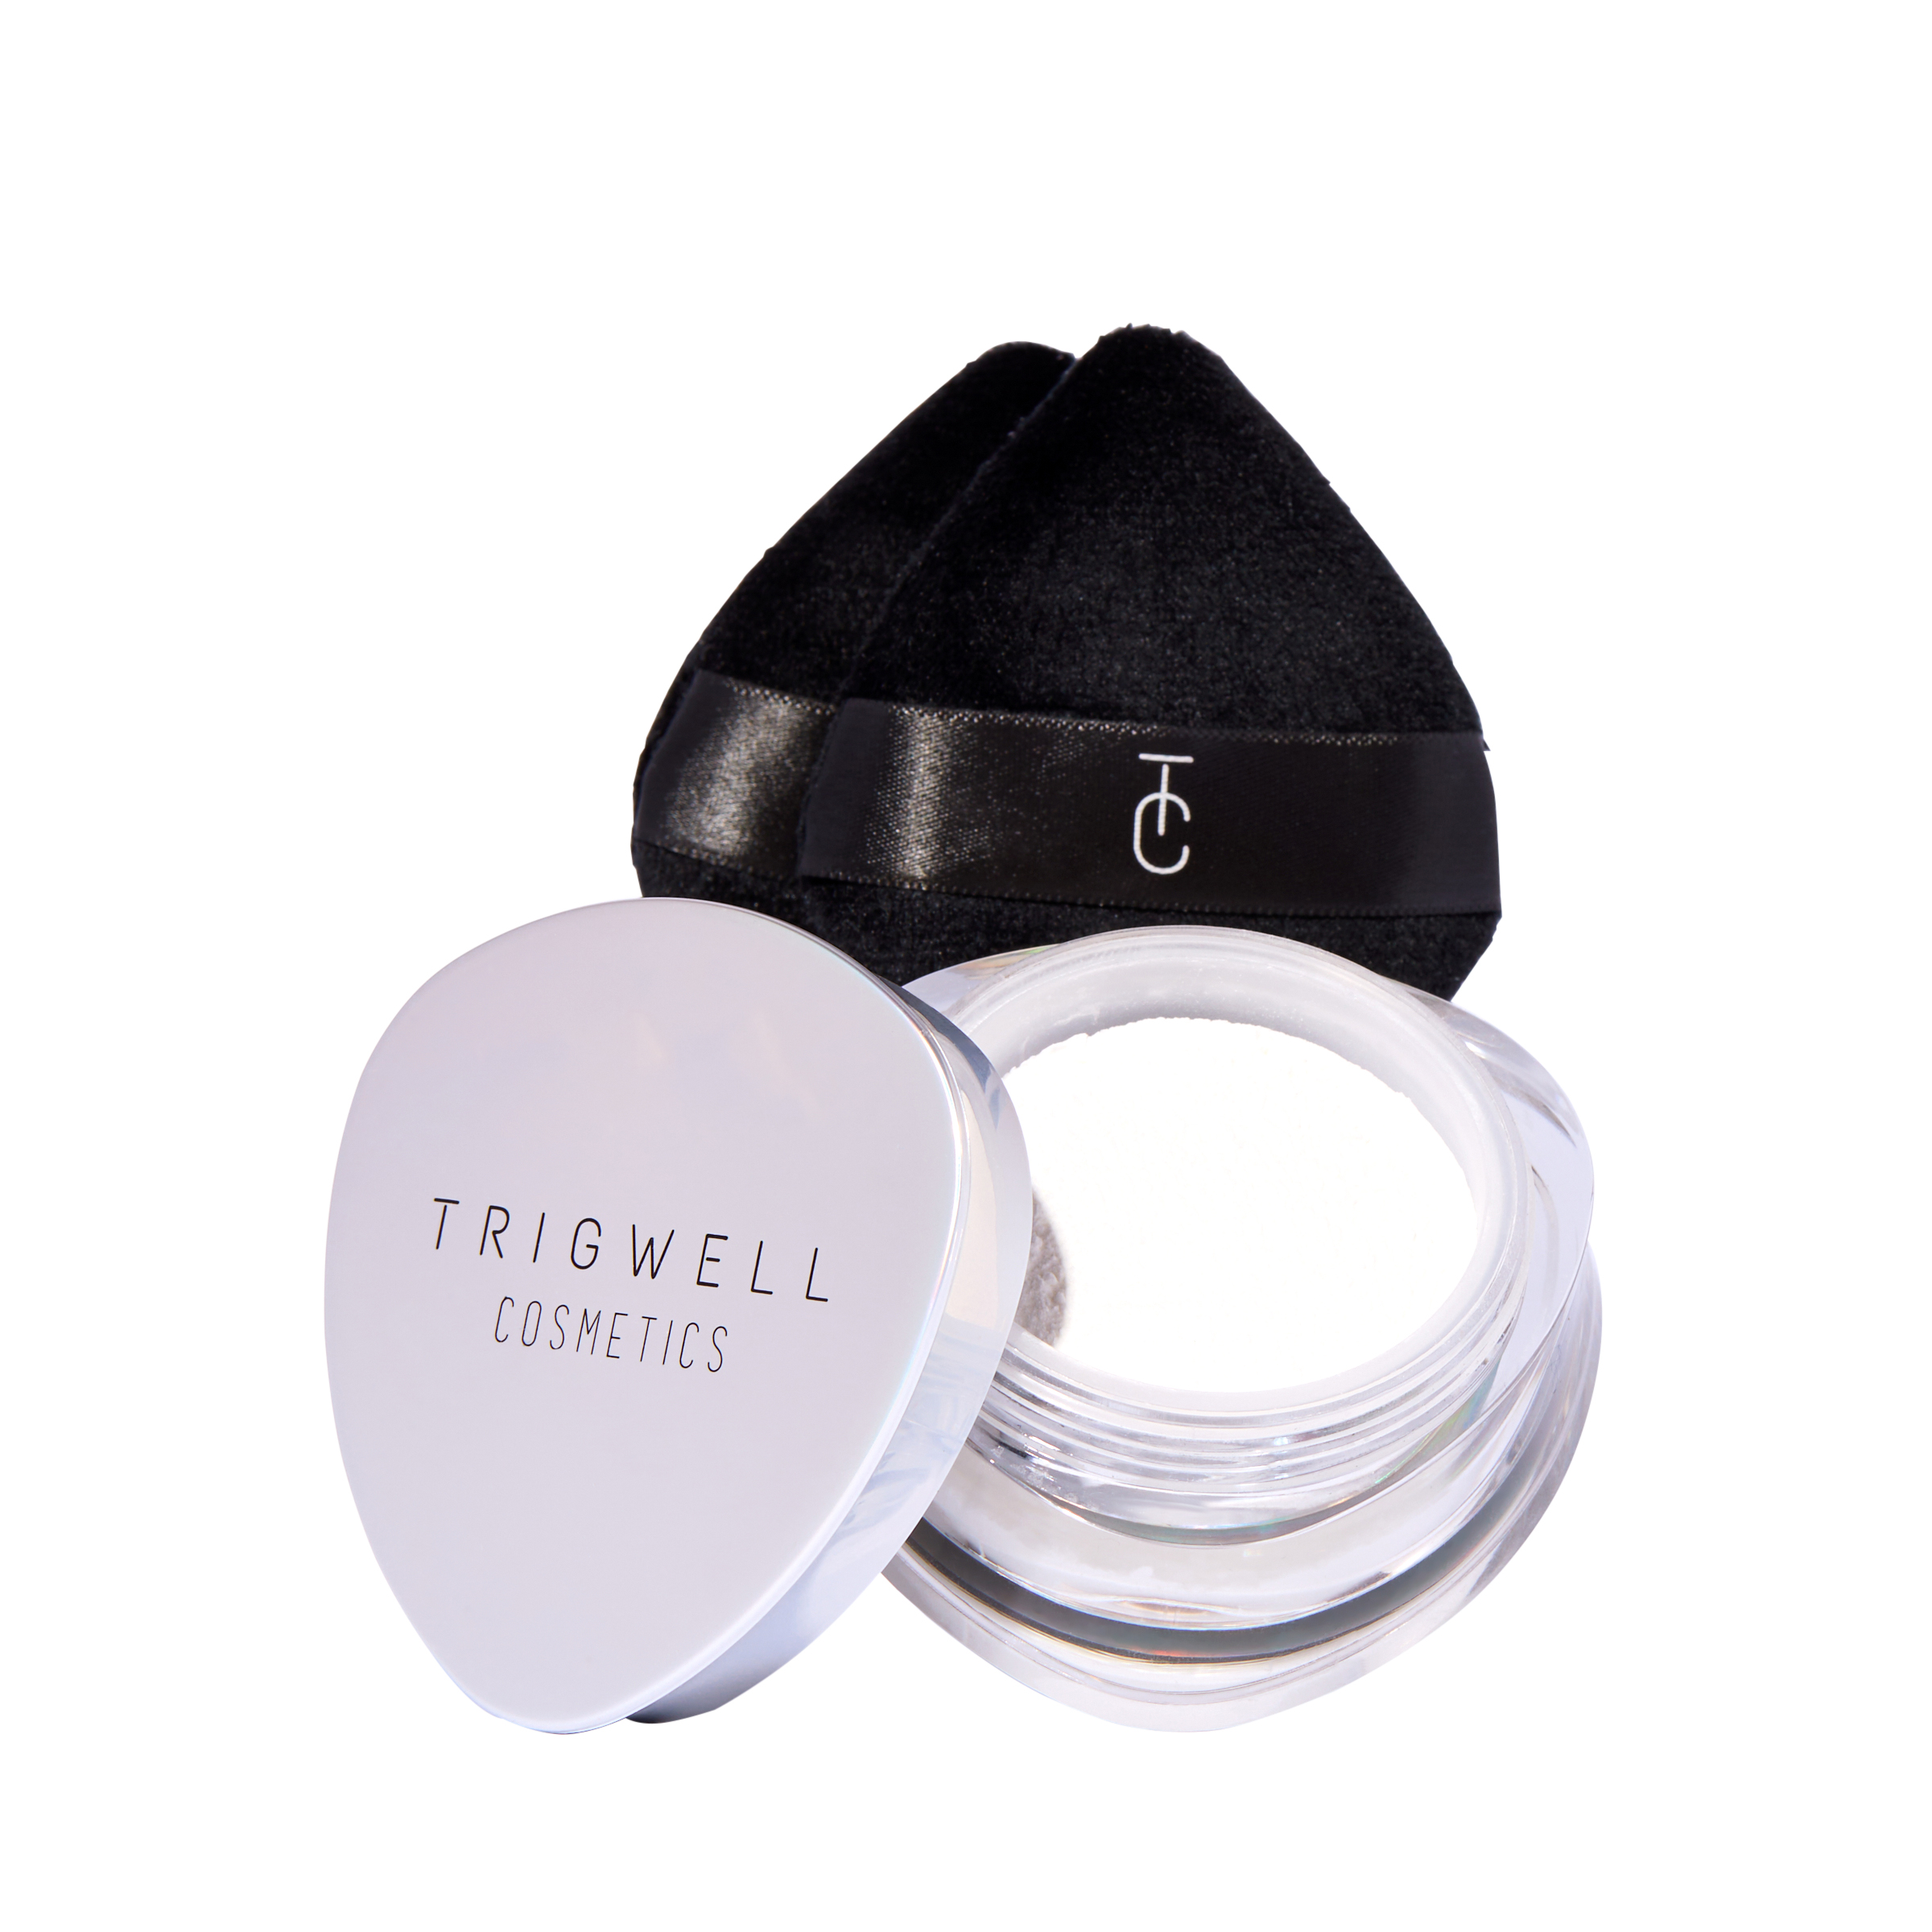 trigwell cosmetics seamless setting duo translucent